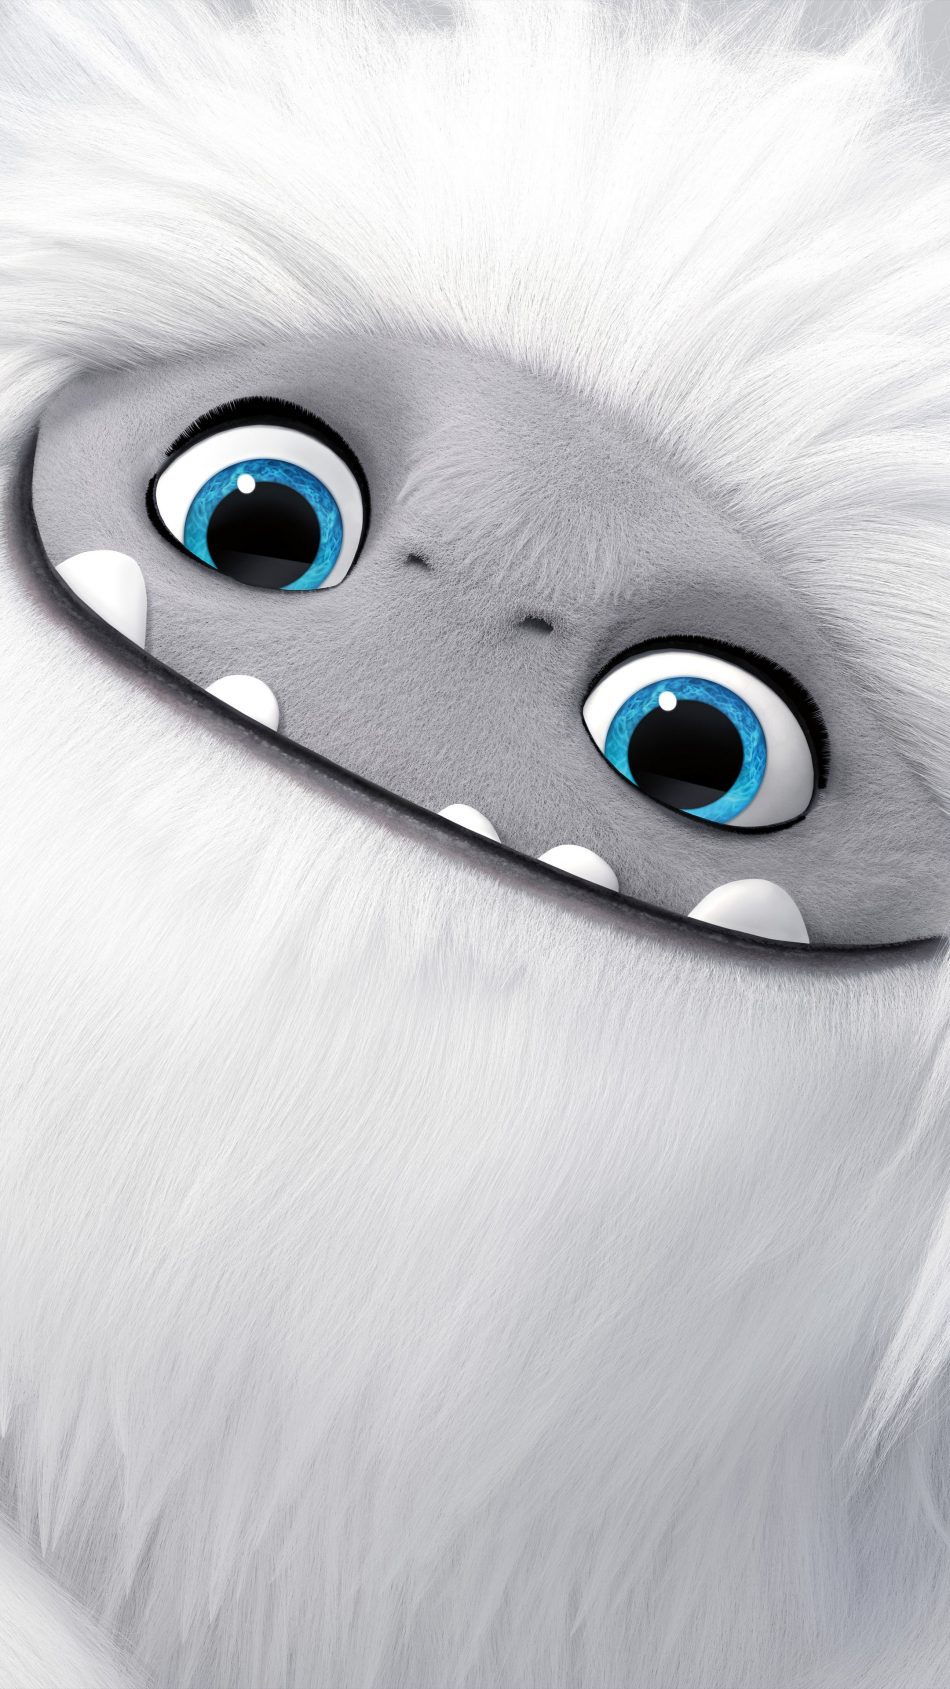 Abominable Animation Pure 4k Ultra HD Mobile